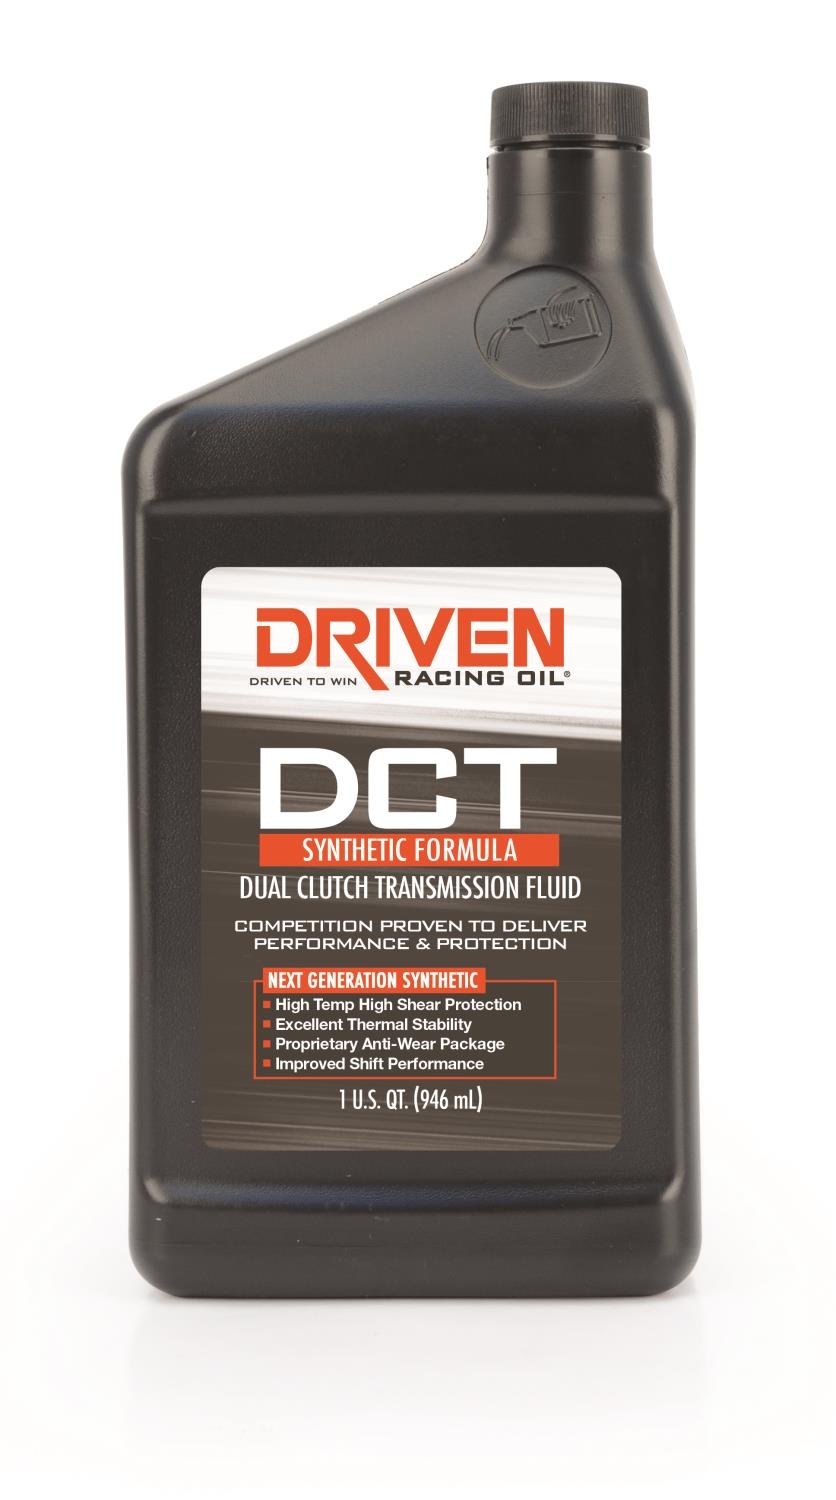 Synthetic Dual Clutch Transmission Fluid